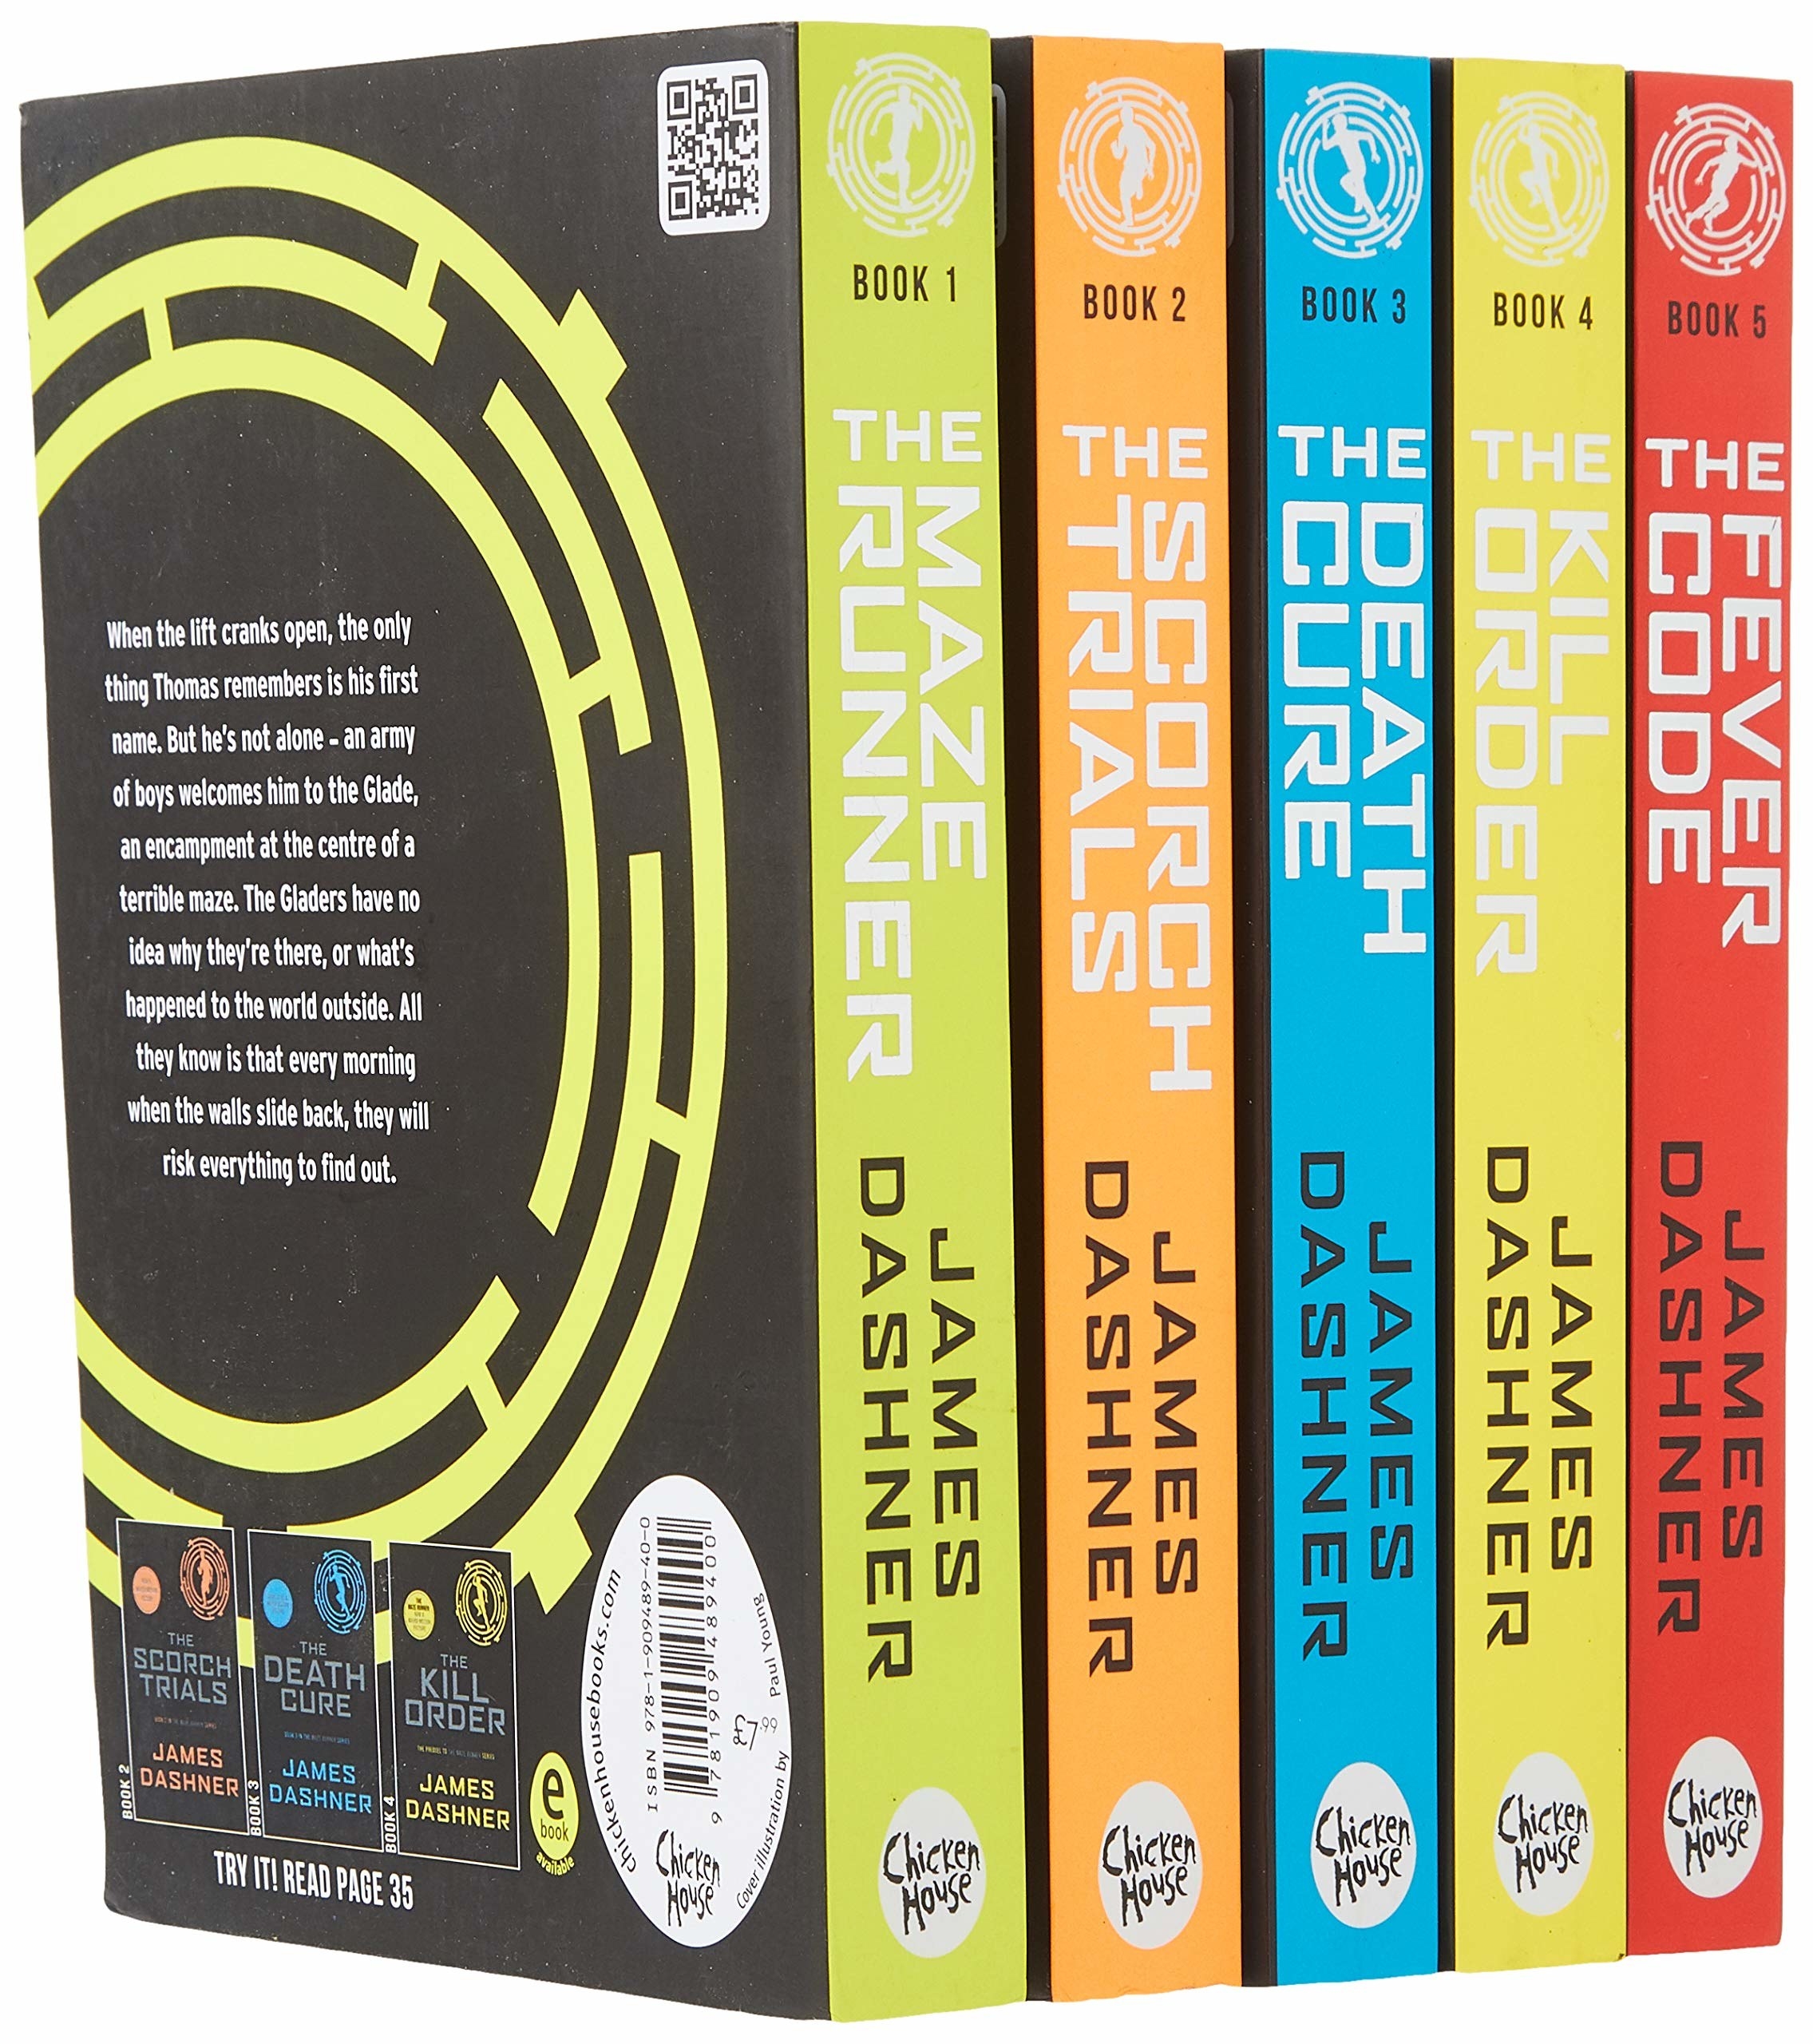 Five book series, all with a black cover and the spines are green, orange, blue, yellow, and red.